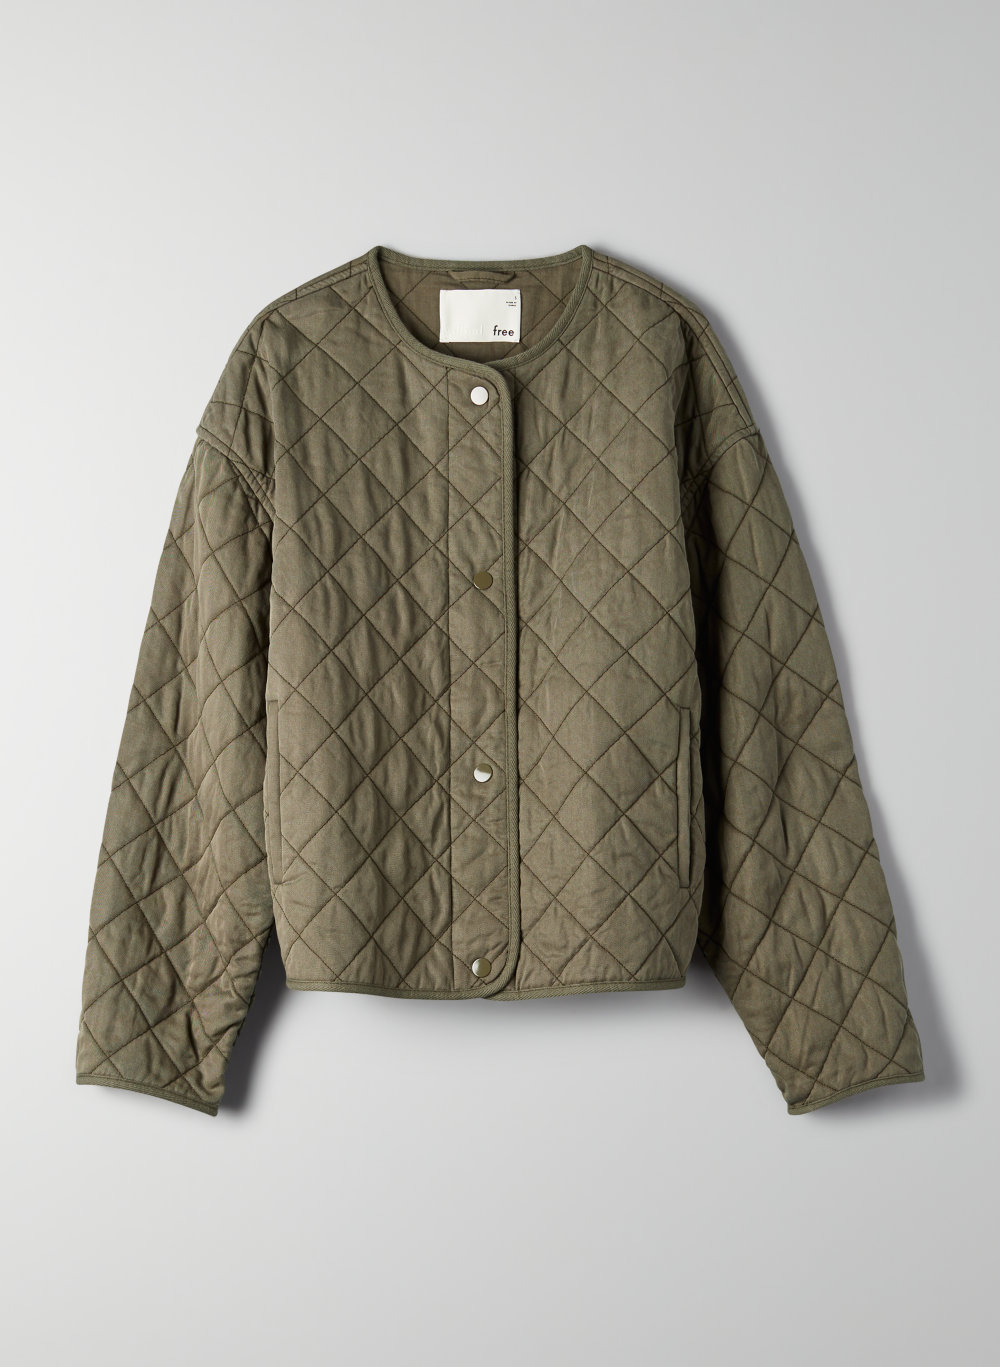 Wilfred Free QUILTED BOMBER JACKET | Aritzia US